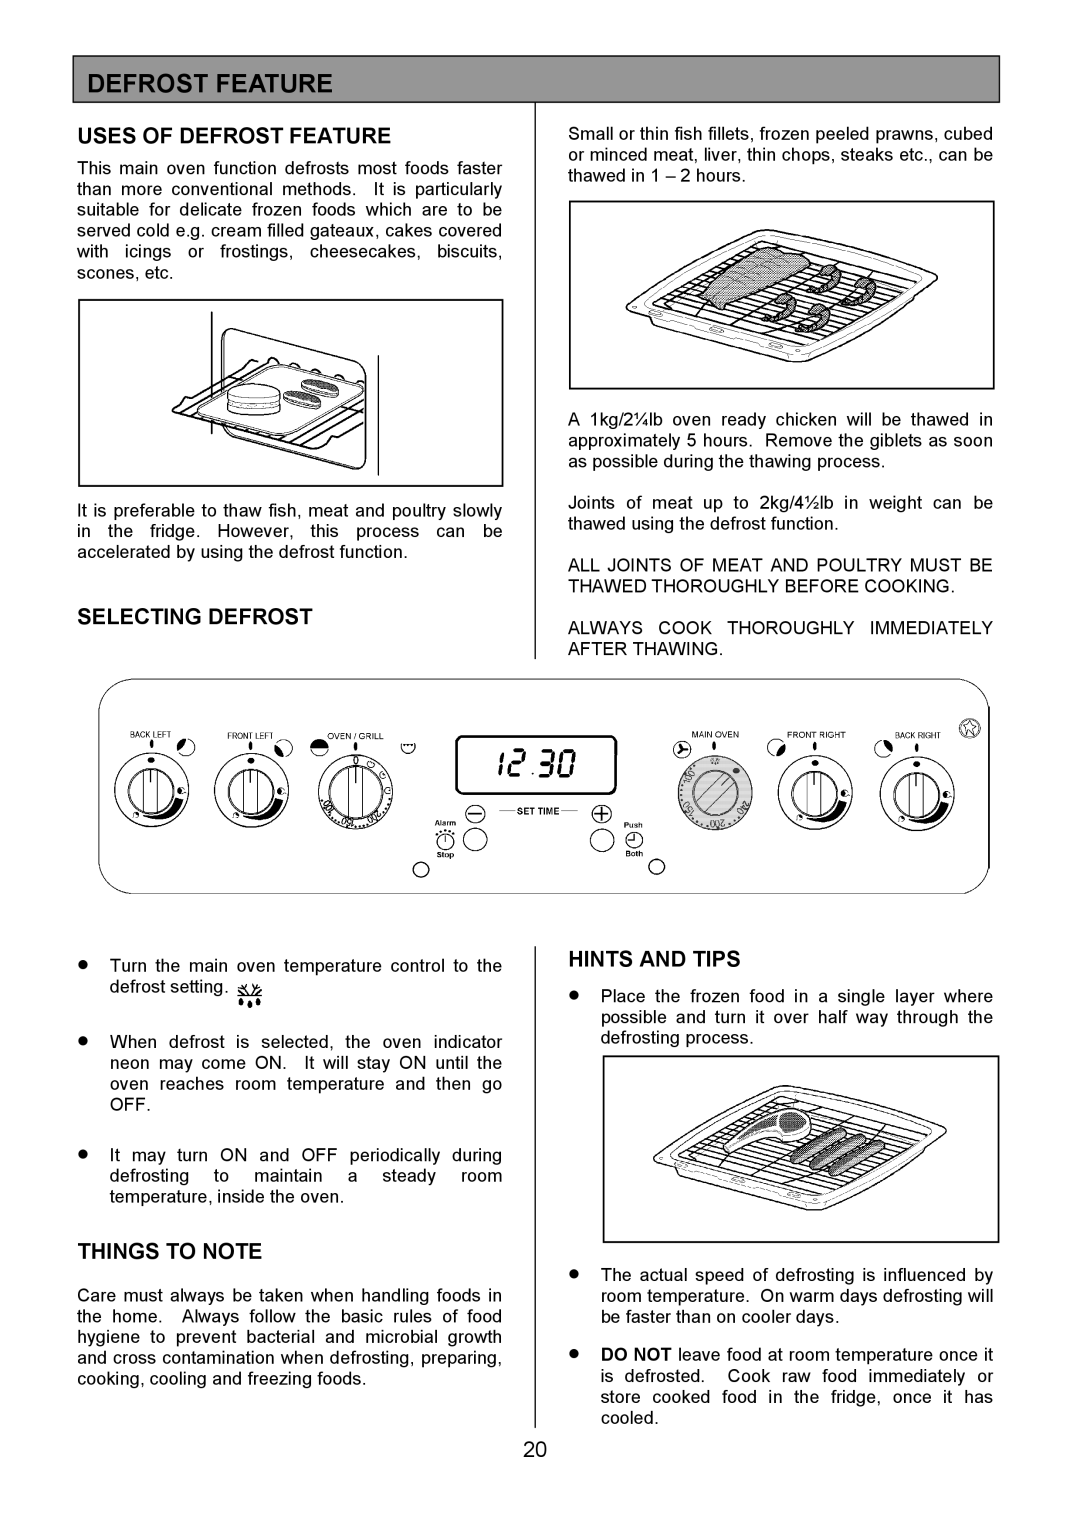 Electrolux SM 554 installation instructions Uses of Defrost Feature, Selecting Defrost 